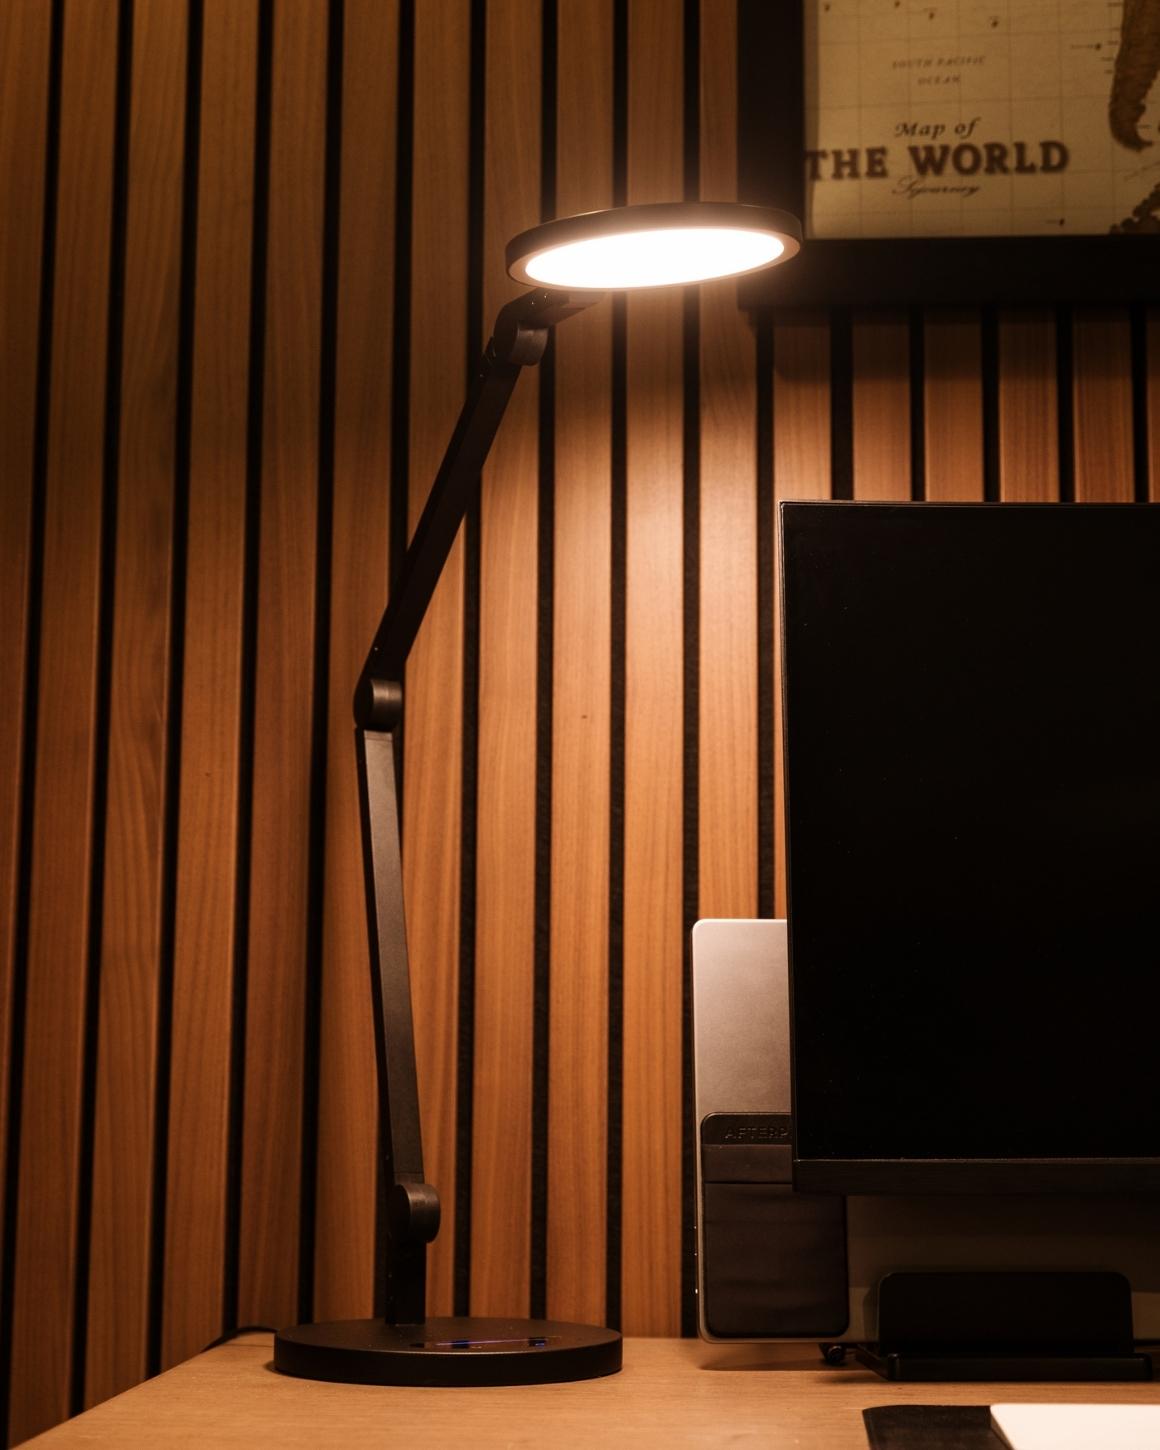 Lume Cube Edge Light With Base on Desk in Darkened Room